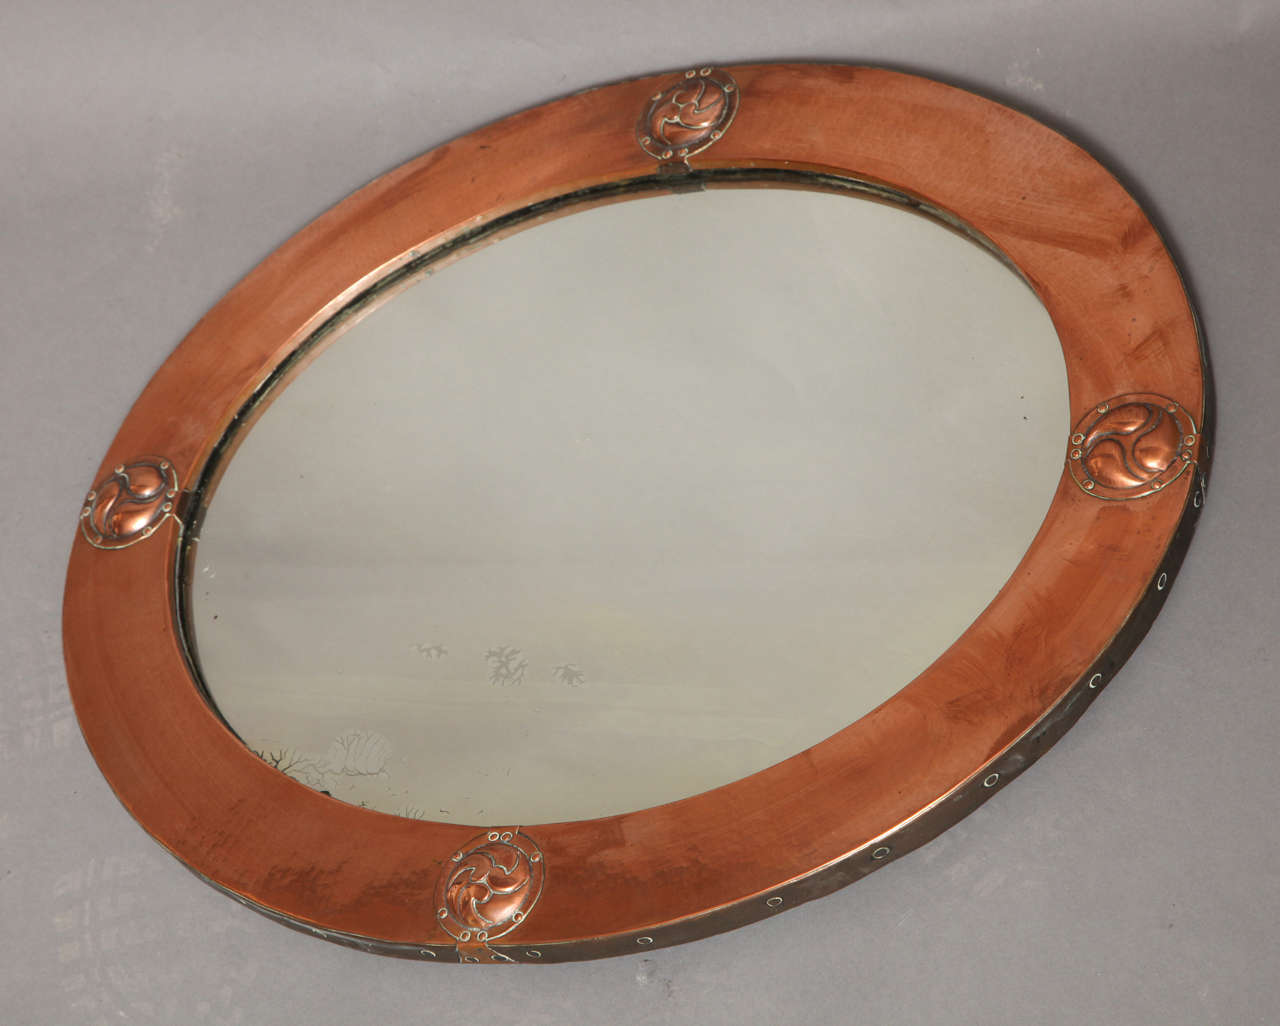 Fine English Arts and Crafts period hammered copper oval mirror by Liberty of London, the bezel frame decorated with hammered copper cabochons depicting Celtic swirls, the whole with mellow closing surface and good design.  The back retains original